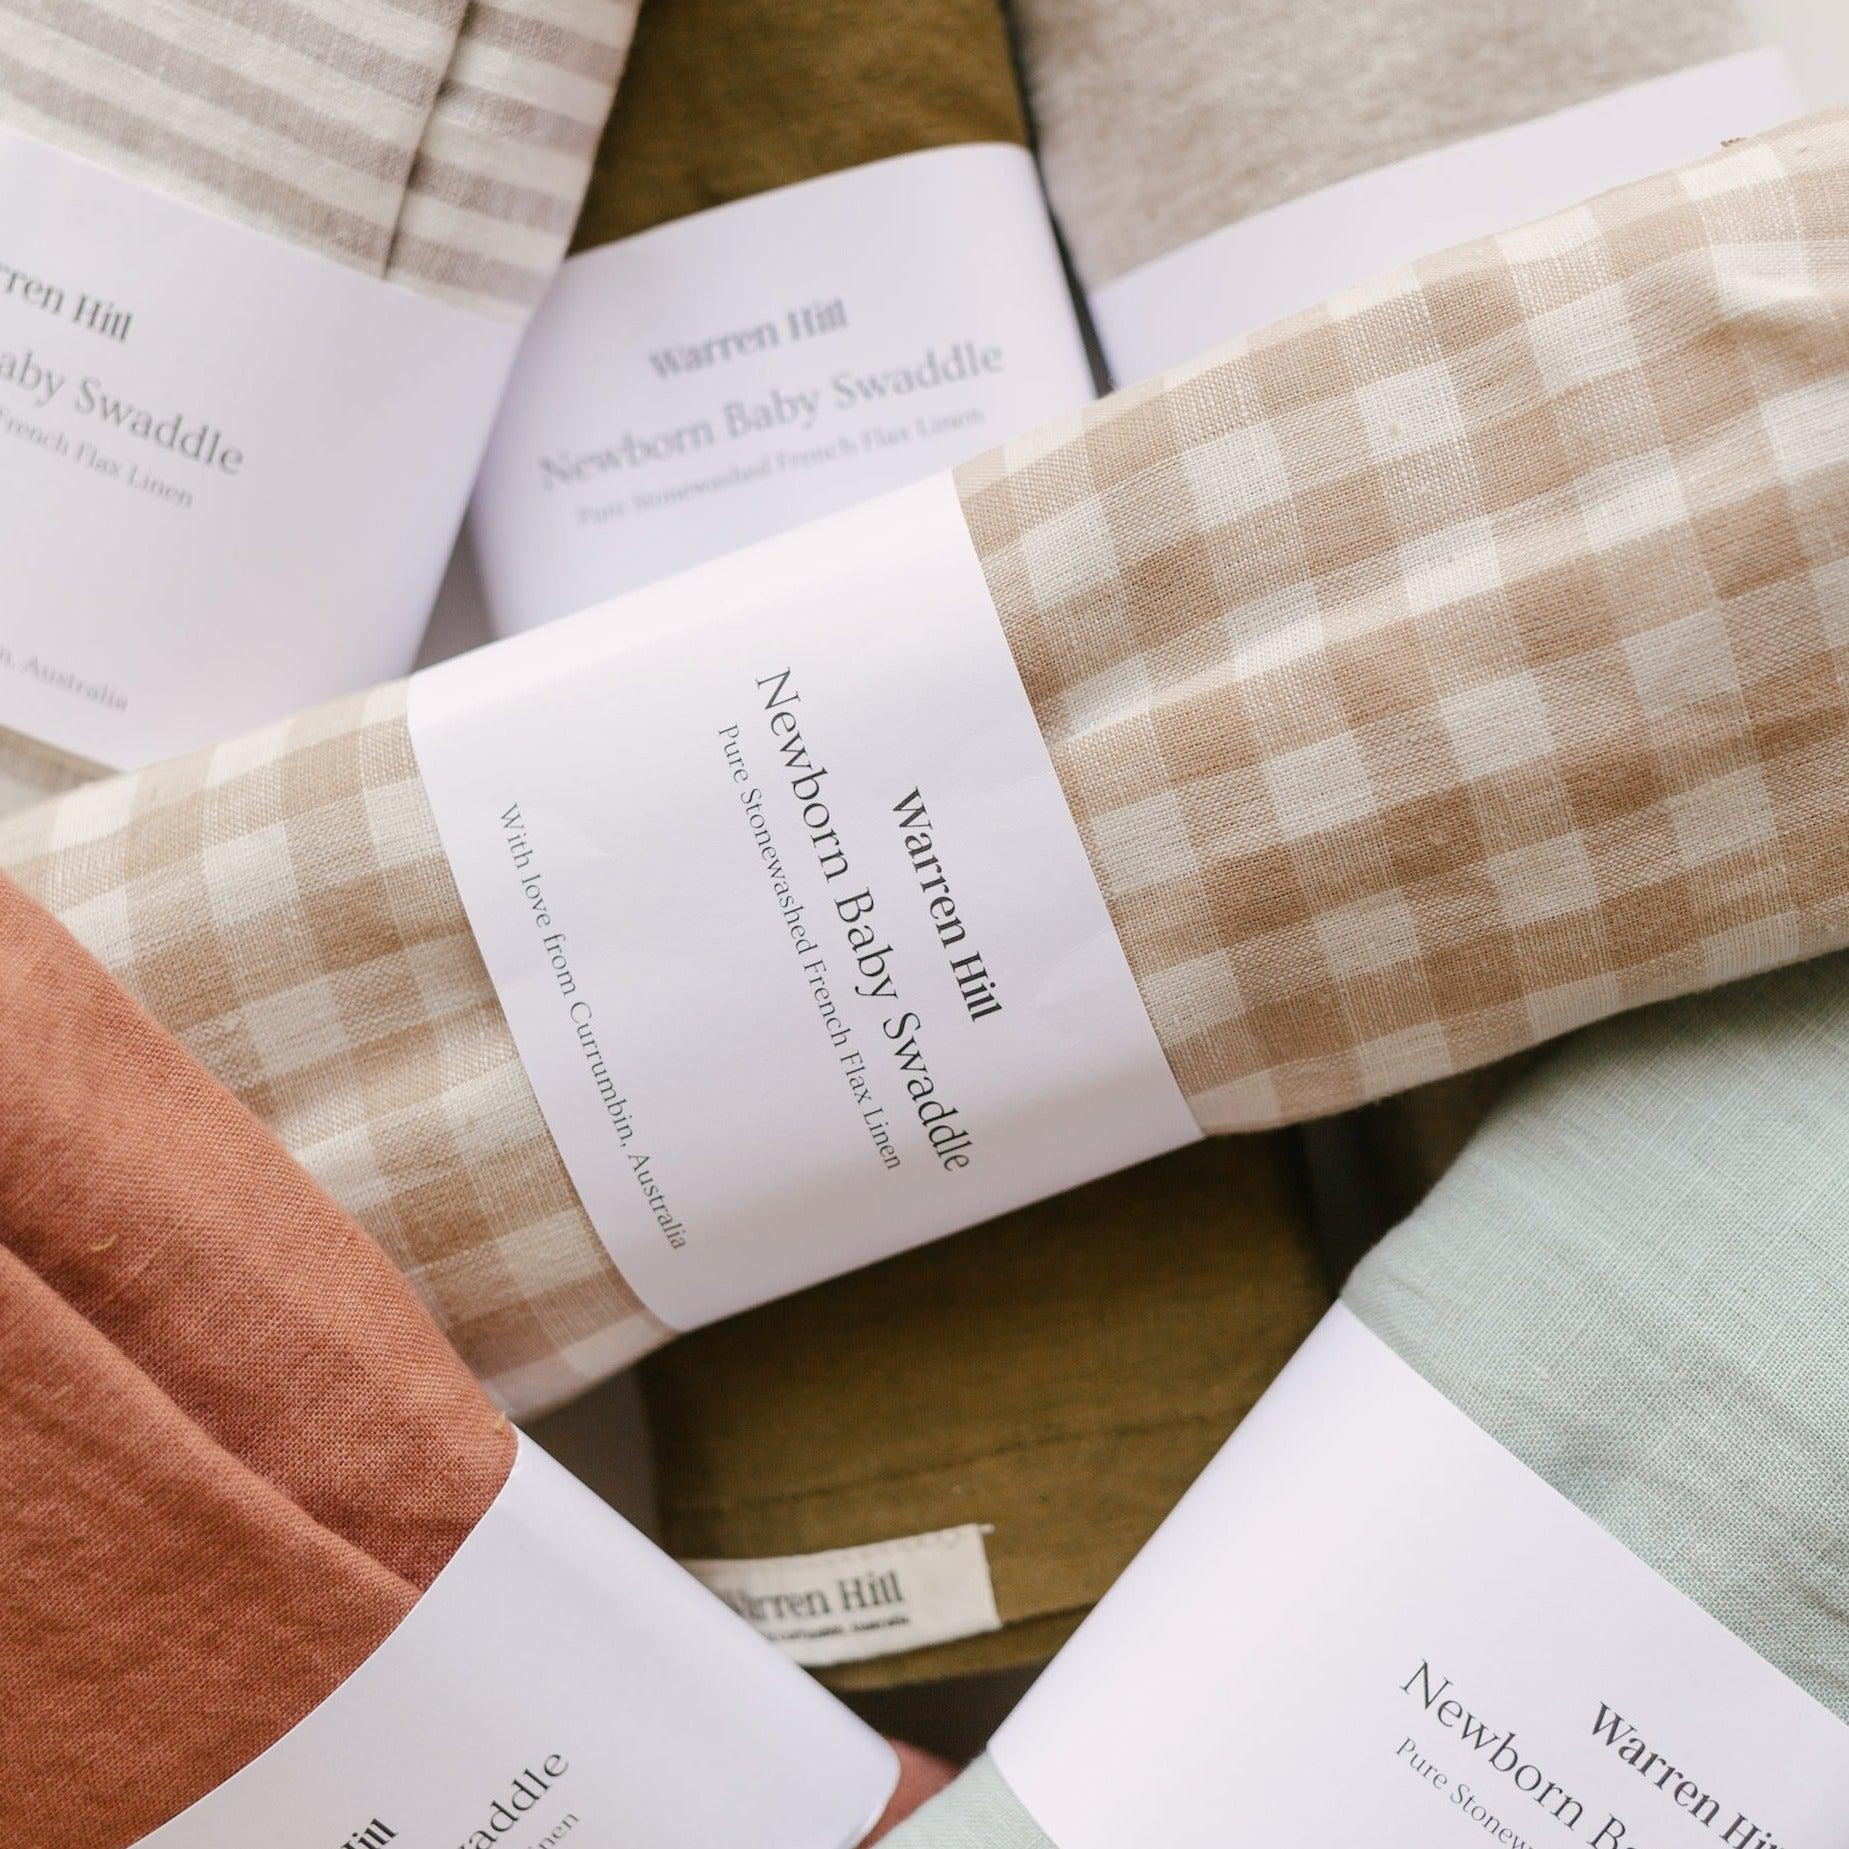 A group of Warren Hill towels with different colors and patterns, including French linen baby swaddle | beige gingham styles.